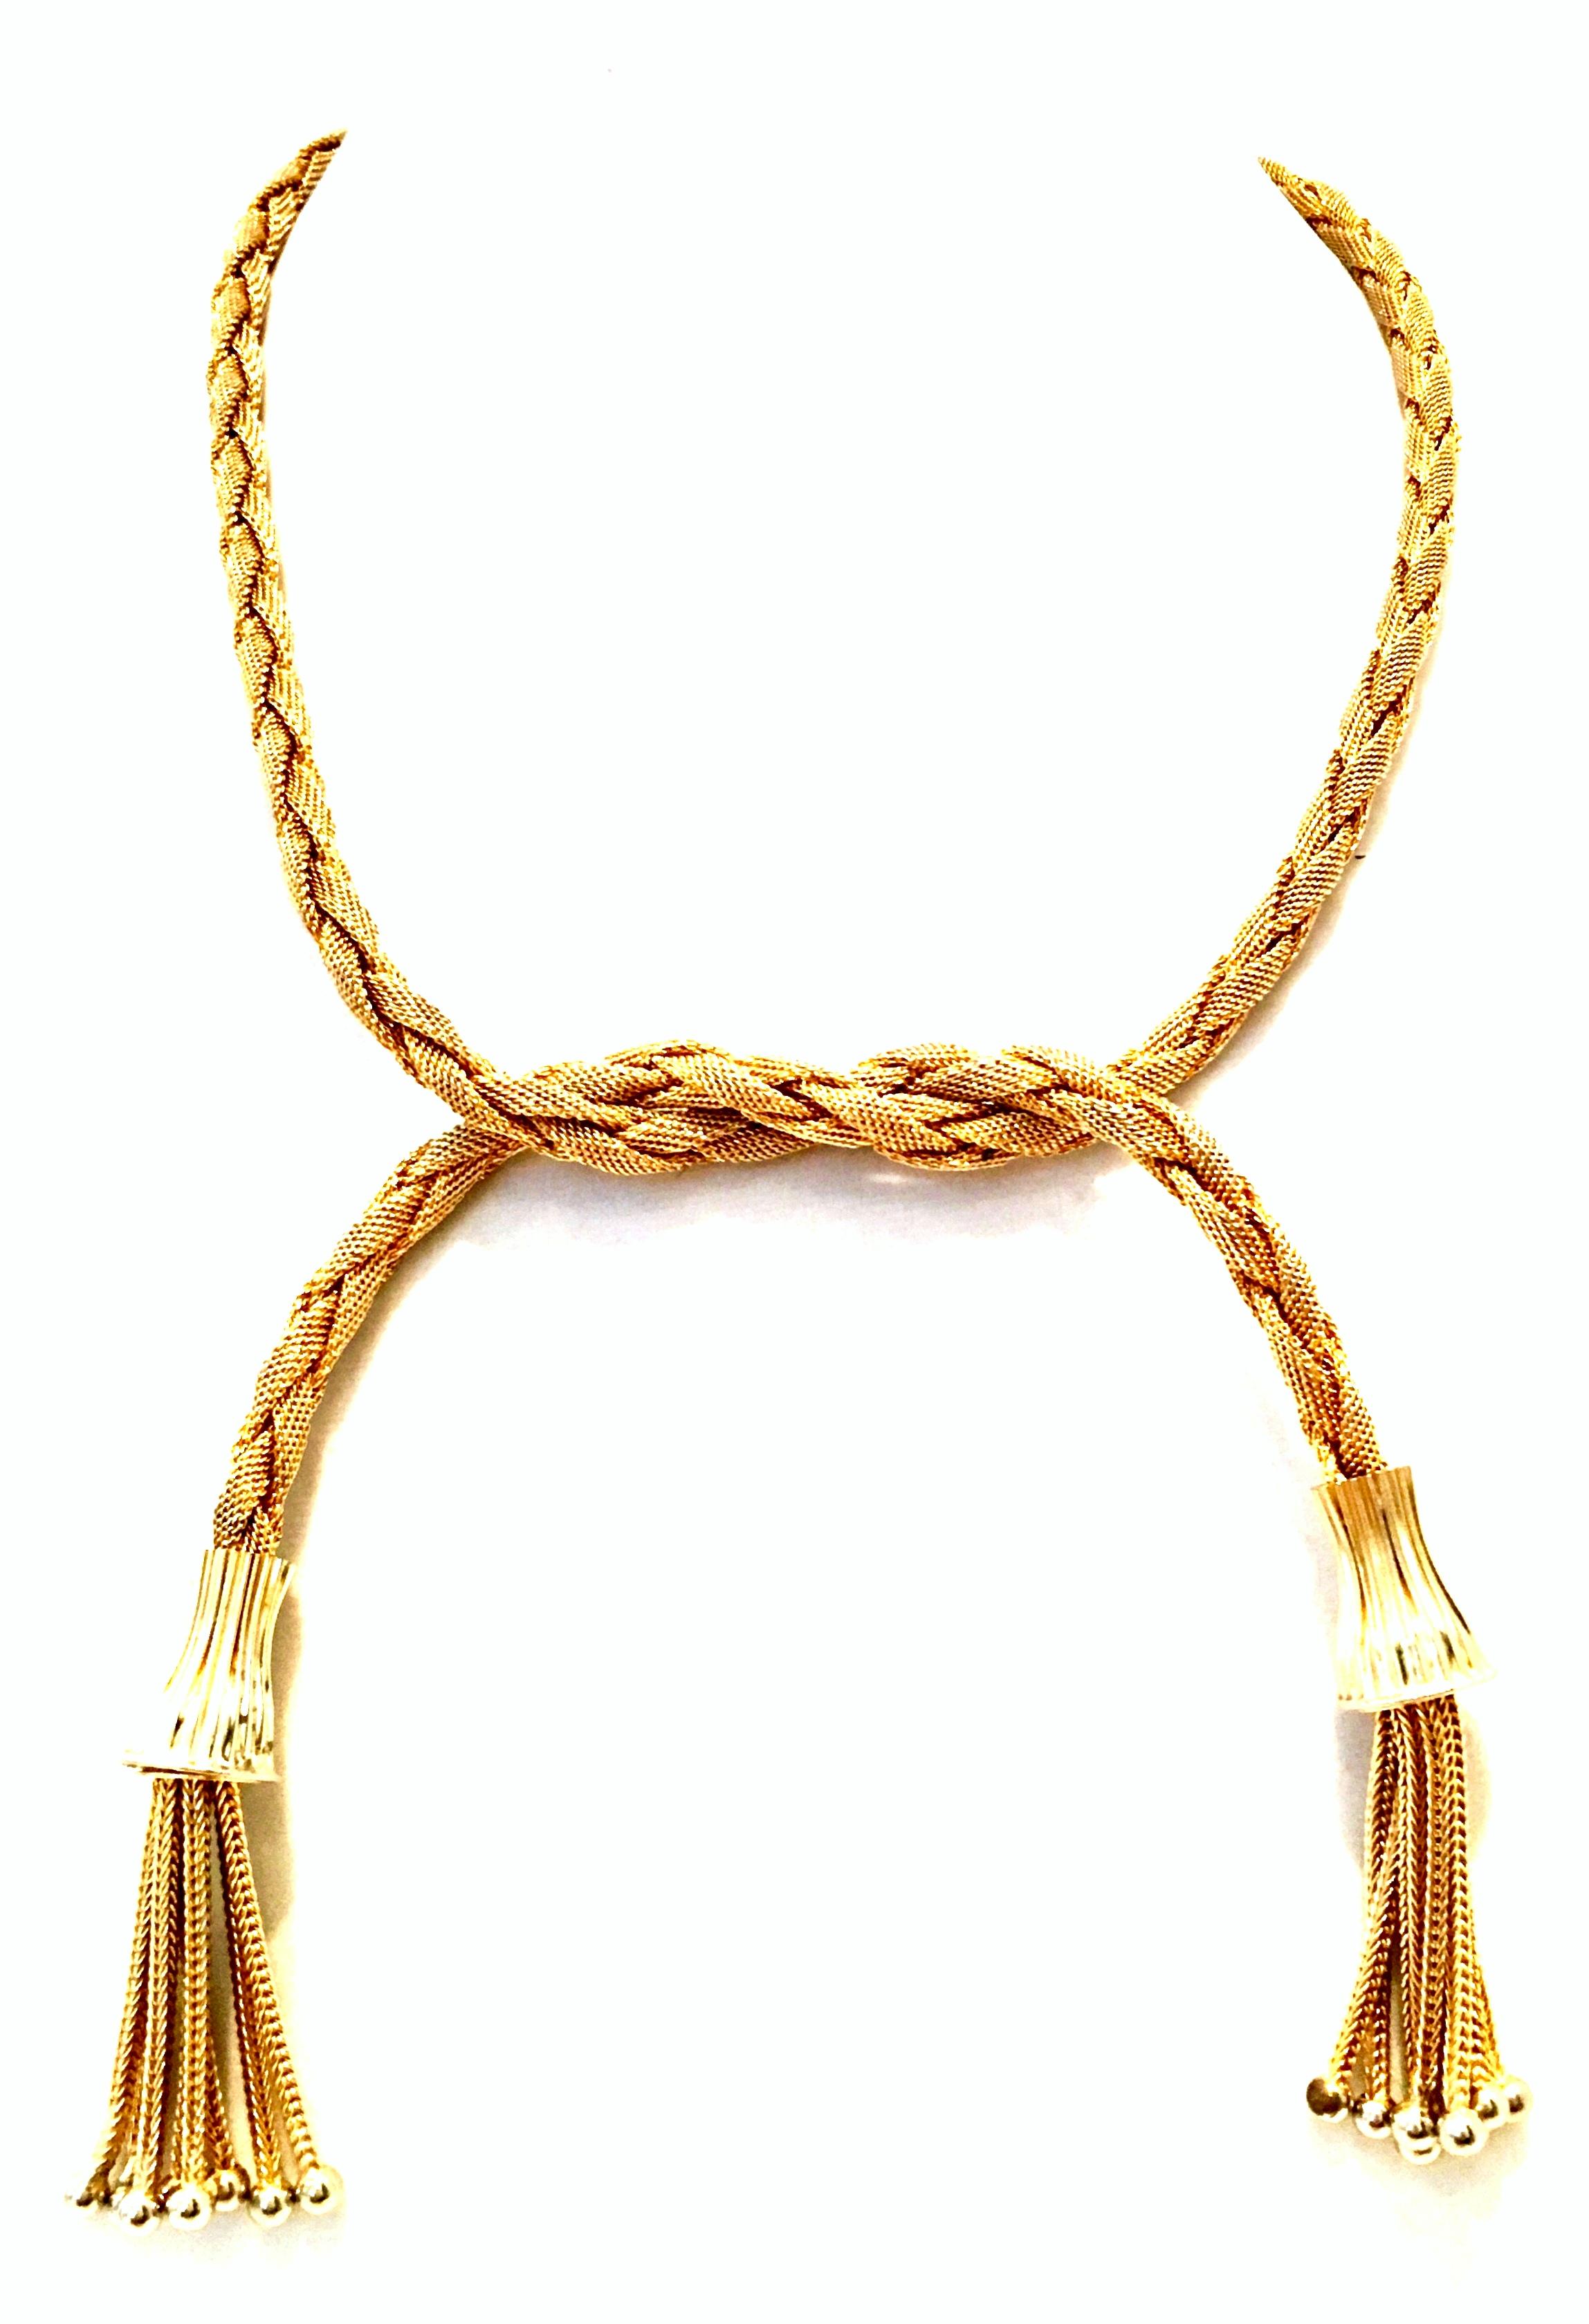 20th Century Gold Plate Braided Rope & Tassel Fringe Sautoir Style Necklace. This open end necklace can be worn in several different ways, from a choker to a longer necklace. 